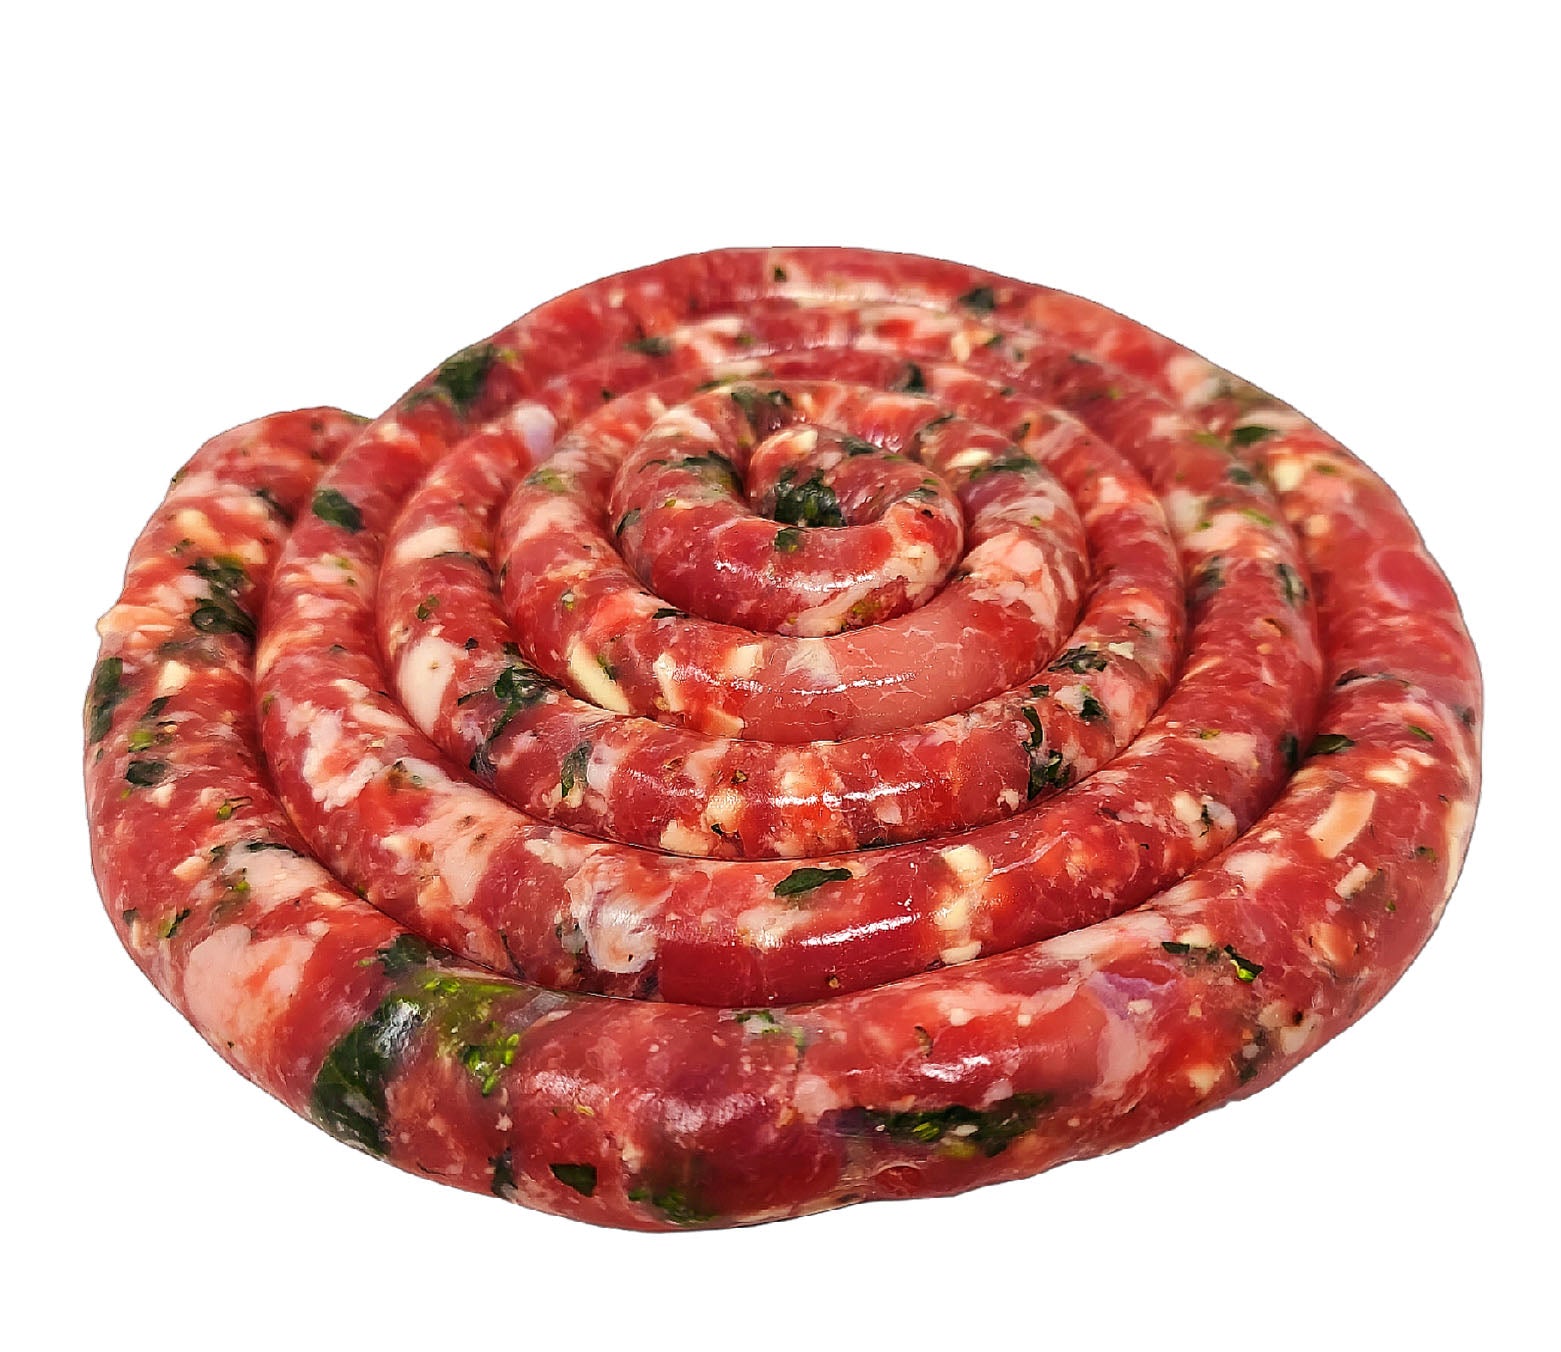 Broccoli Rabe Sausage Ring - All Natural and Delicious!